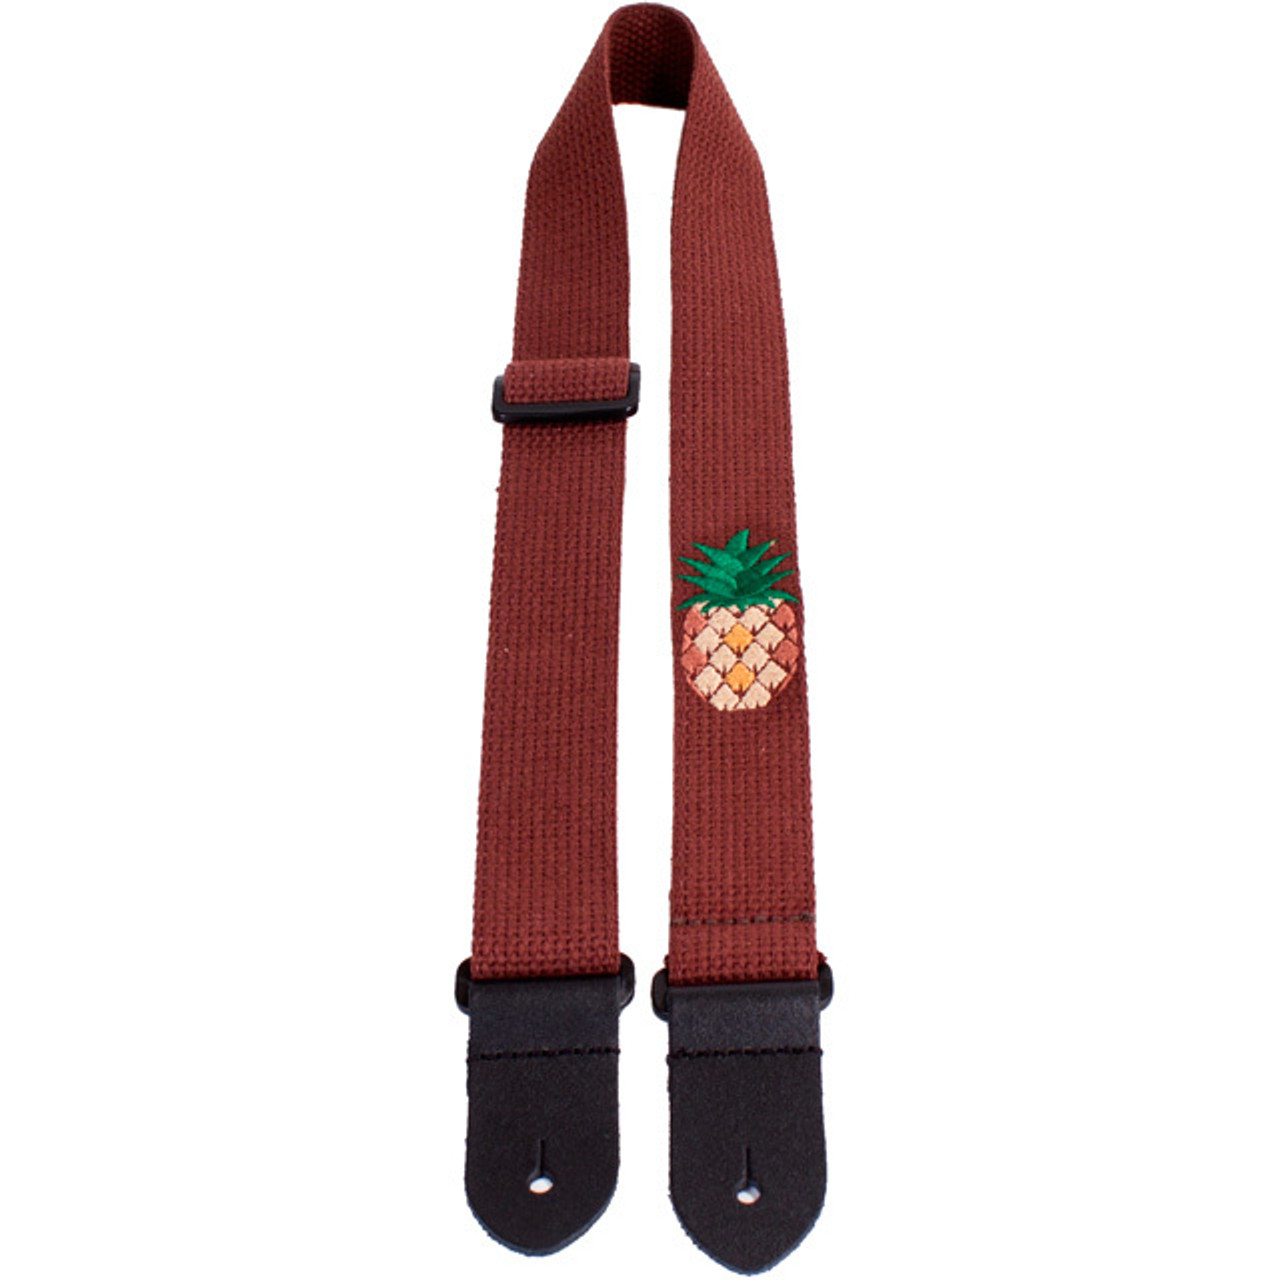 Perris 1.5" Cotton Ukulele Strap in Brown with Pineapple Embroidery & Leather ends